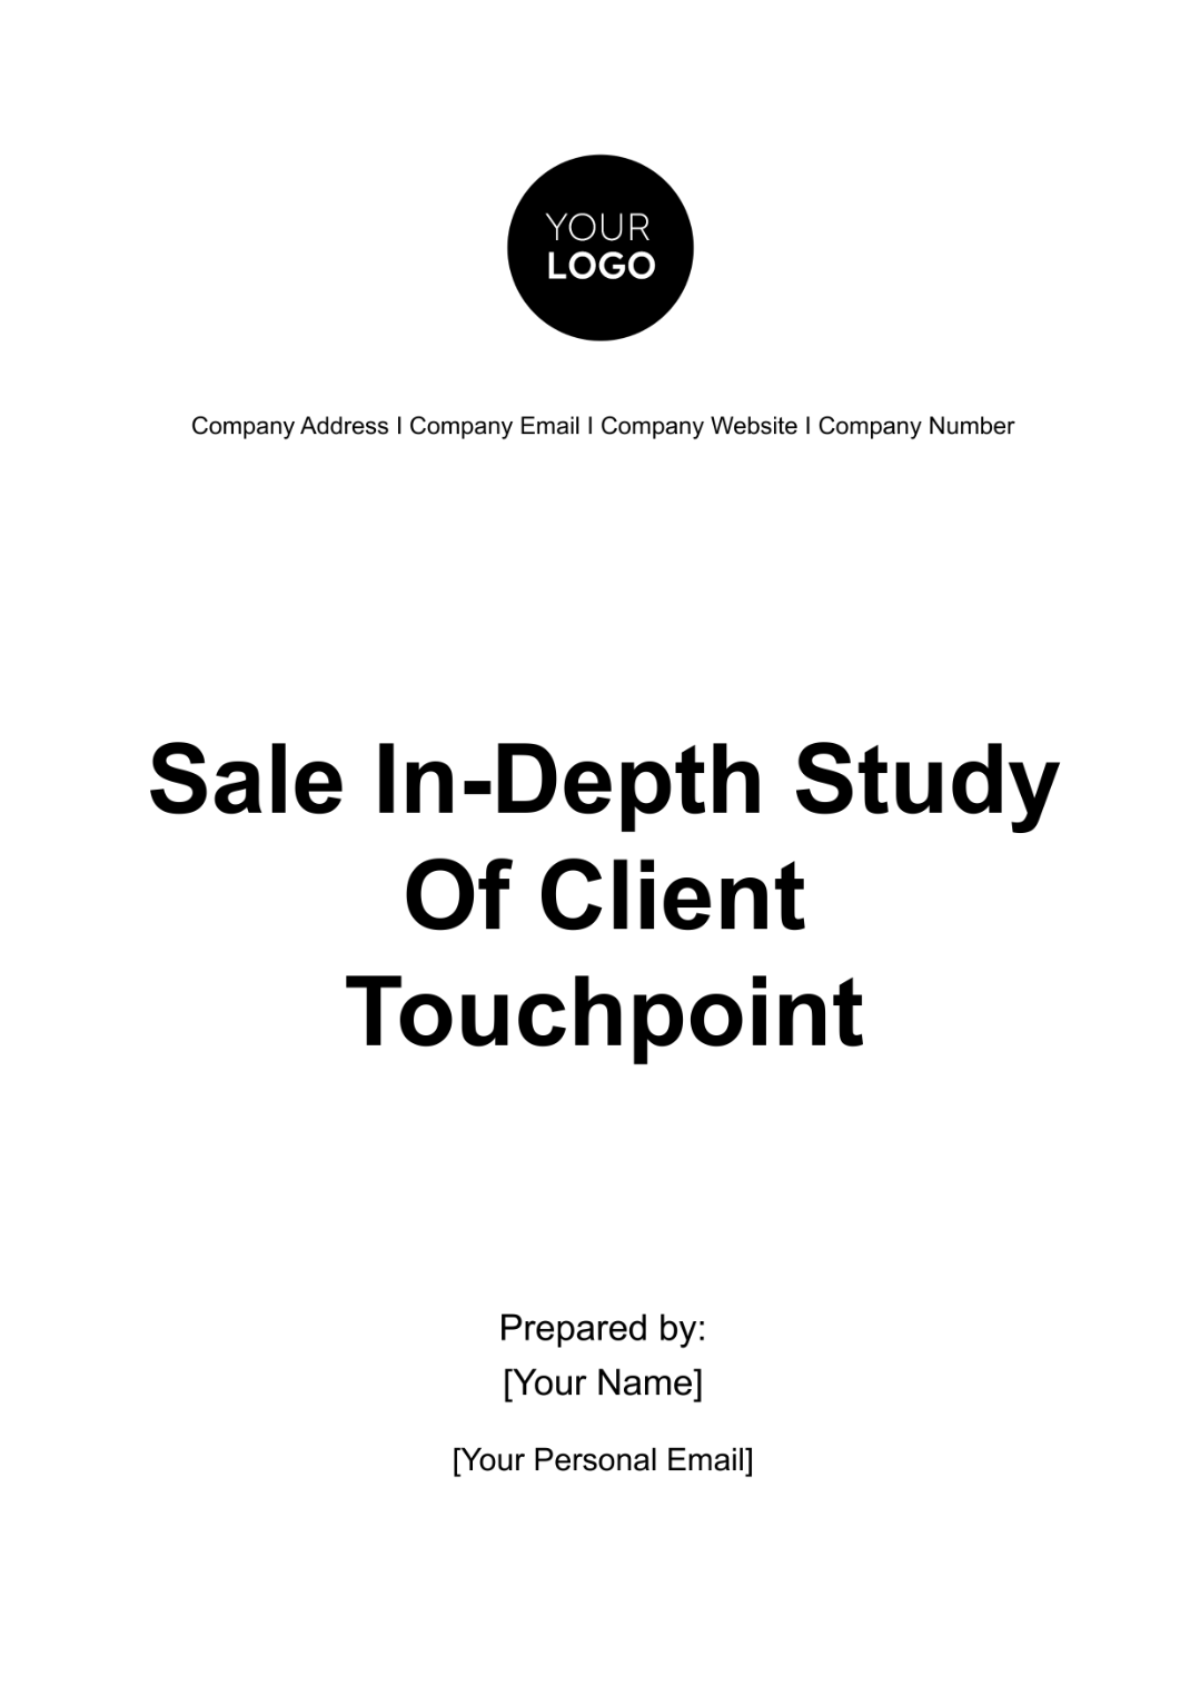 Sales In-depth Study of Client Touchpoints Template